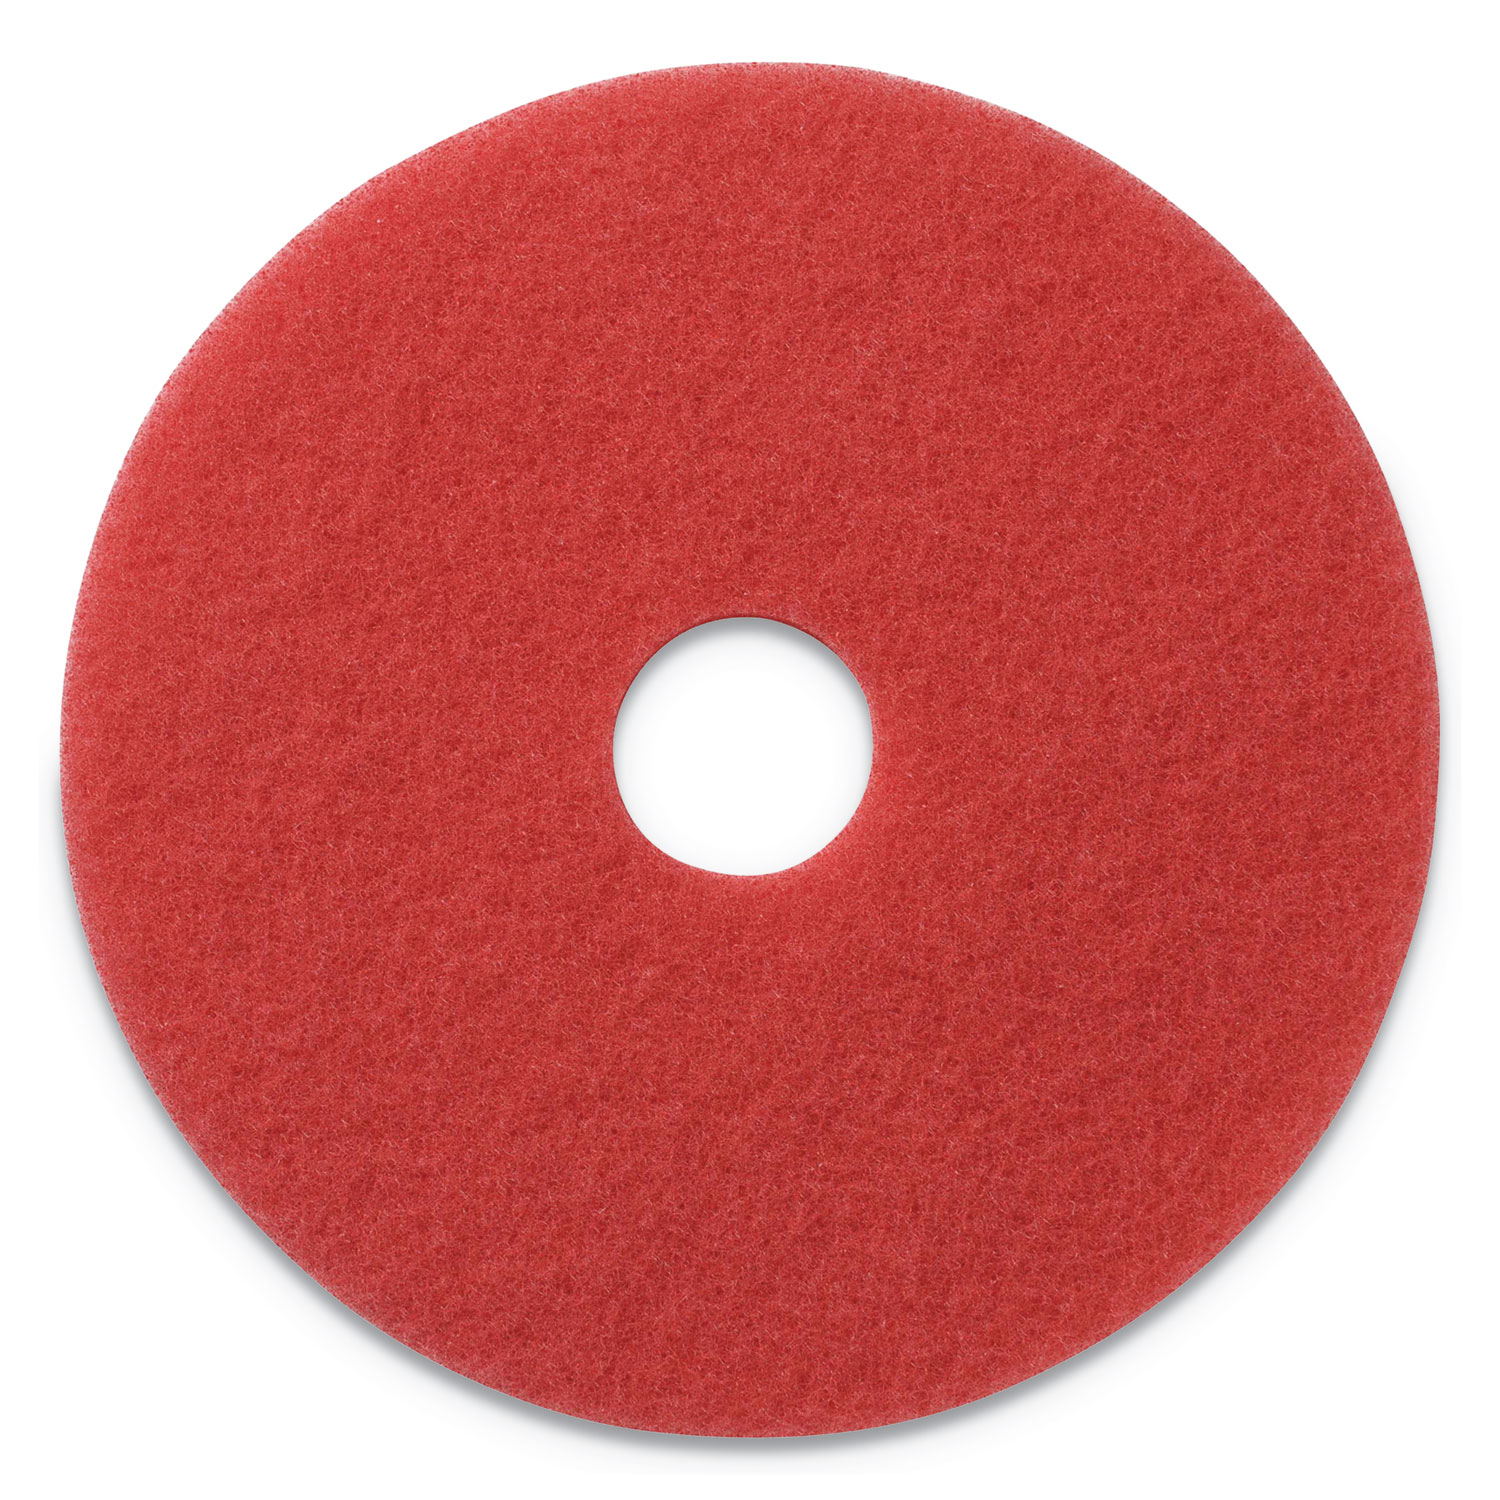  Americo 404420 Buffing Pads, 20 Diameter, Red, 5/CT (AMF404420) 